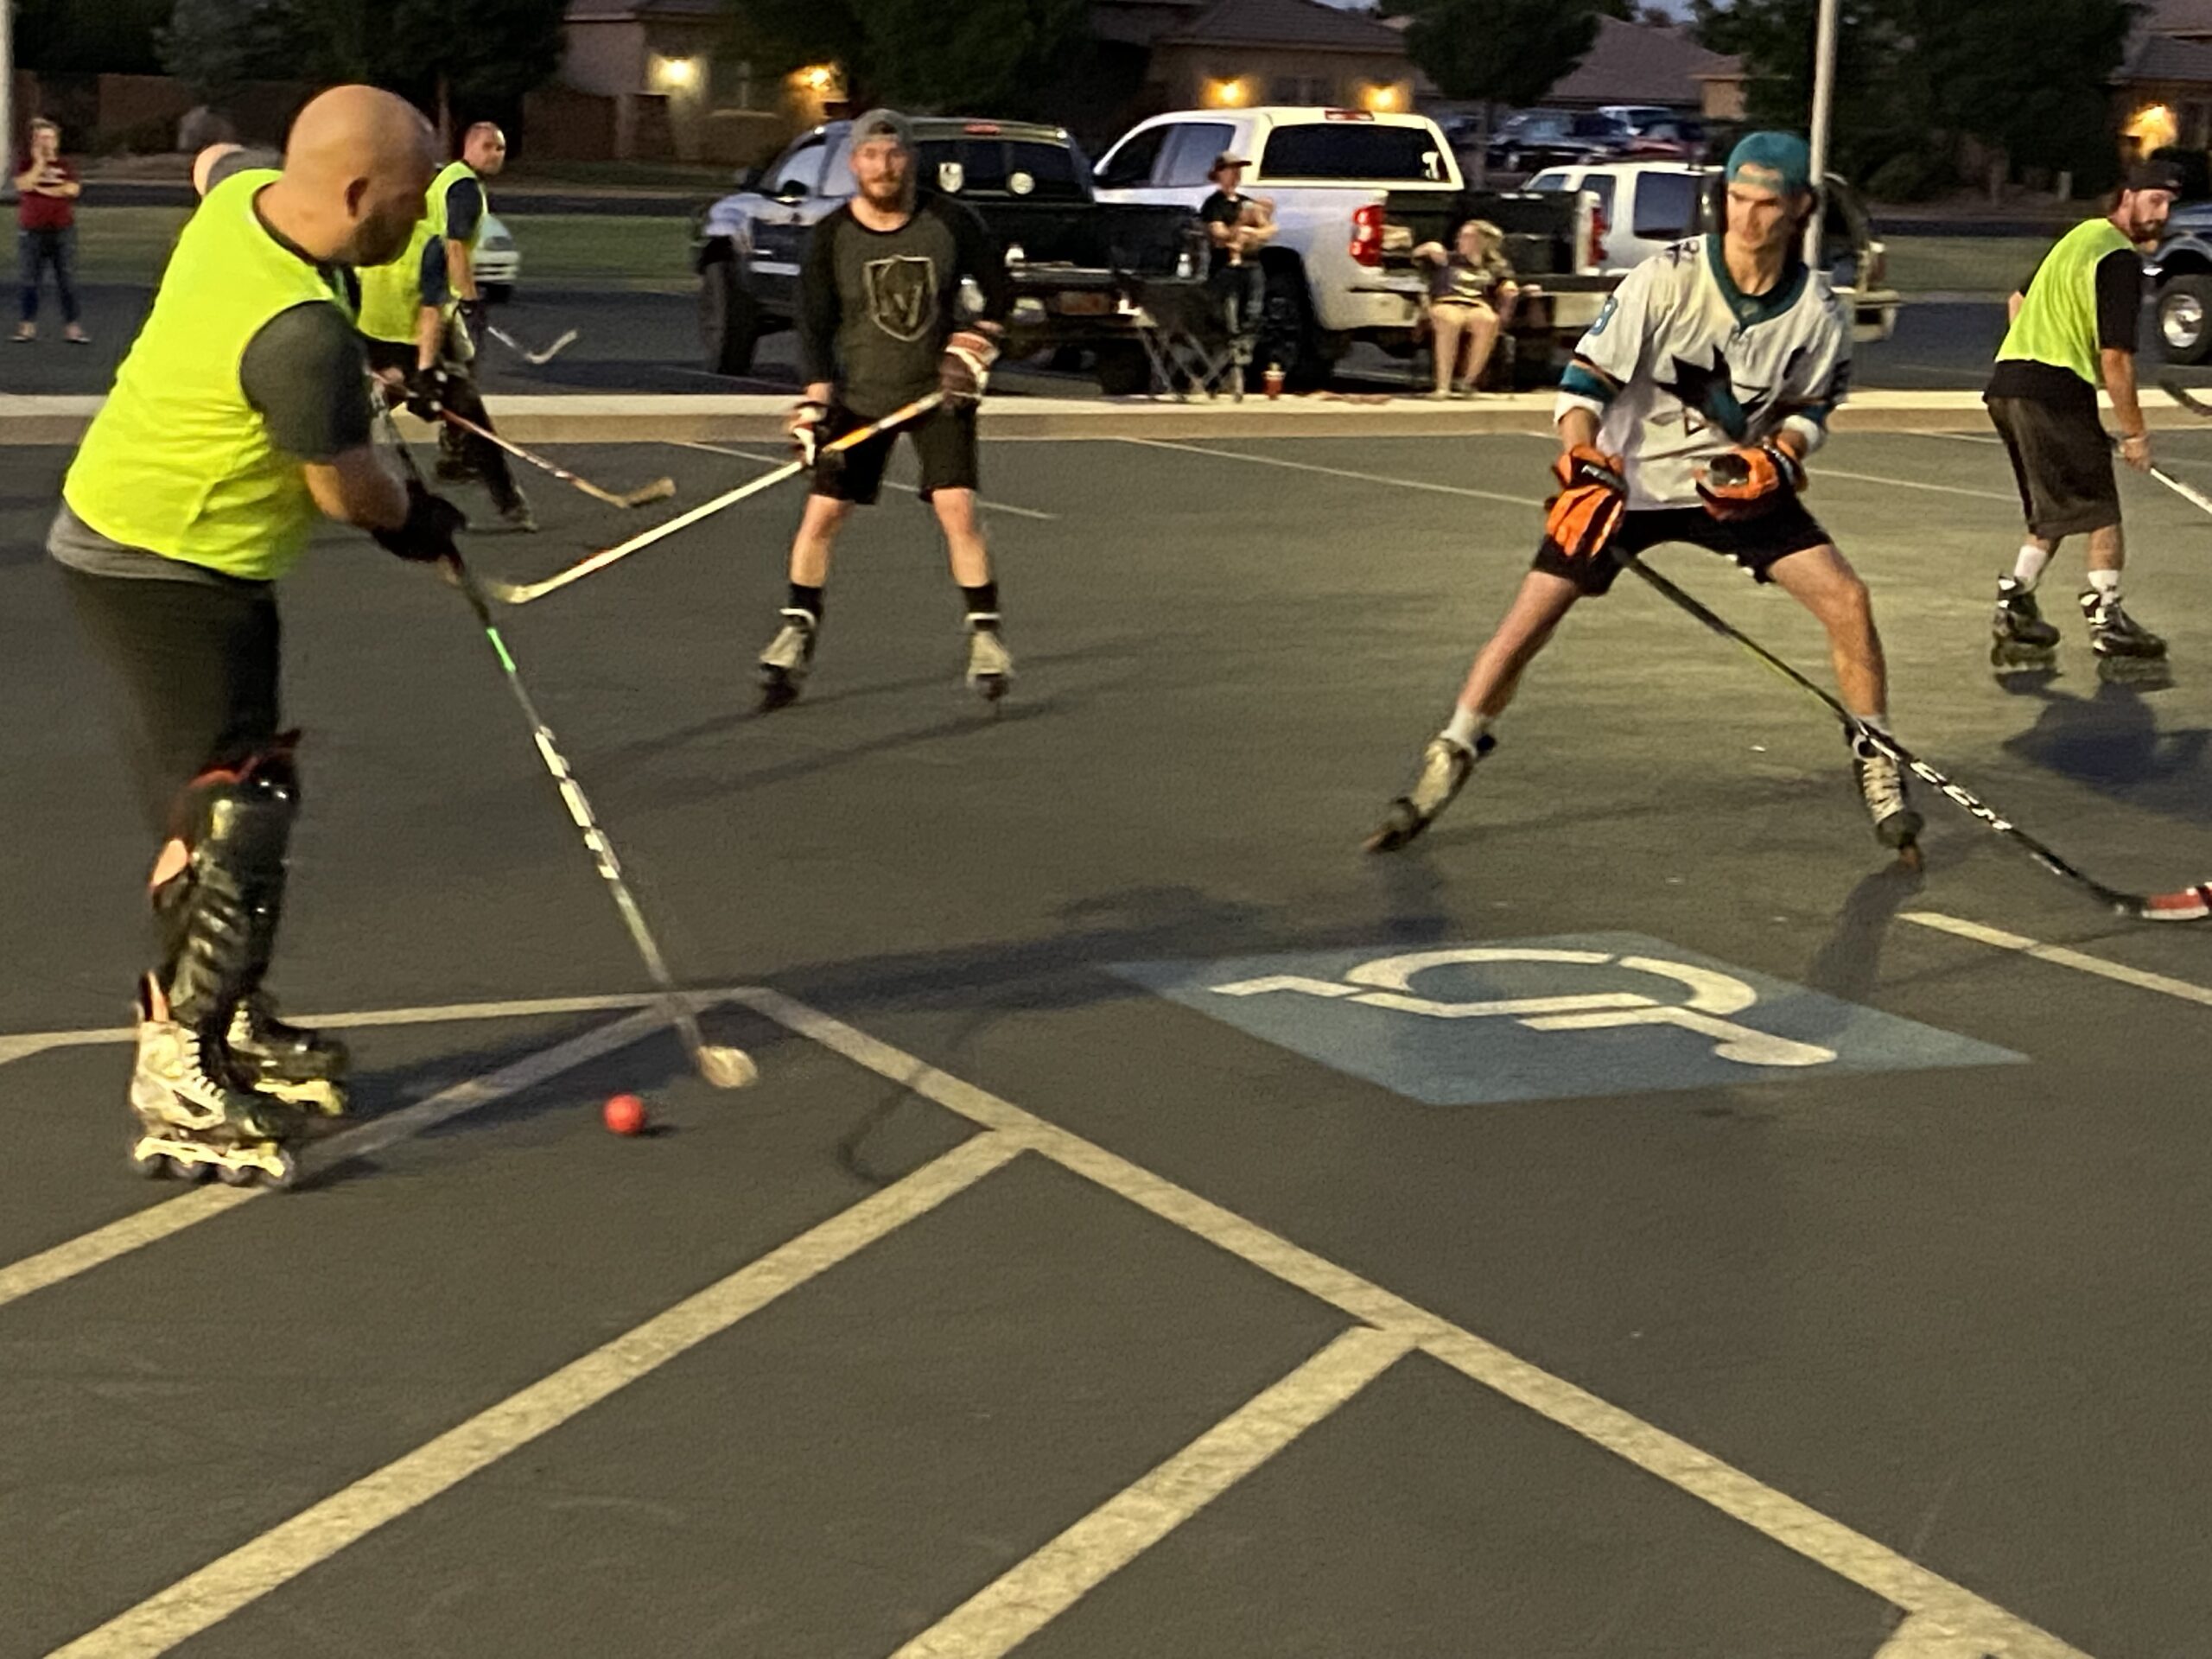 Roller hockey enthusiasts burn up the asphalt at weekly games